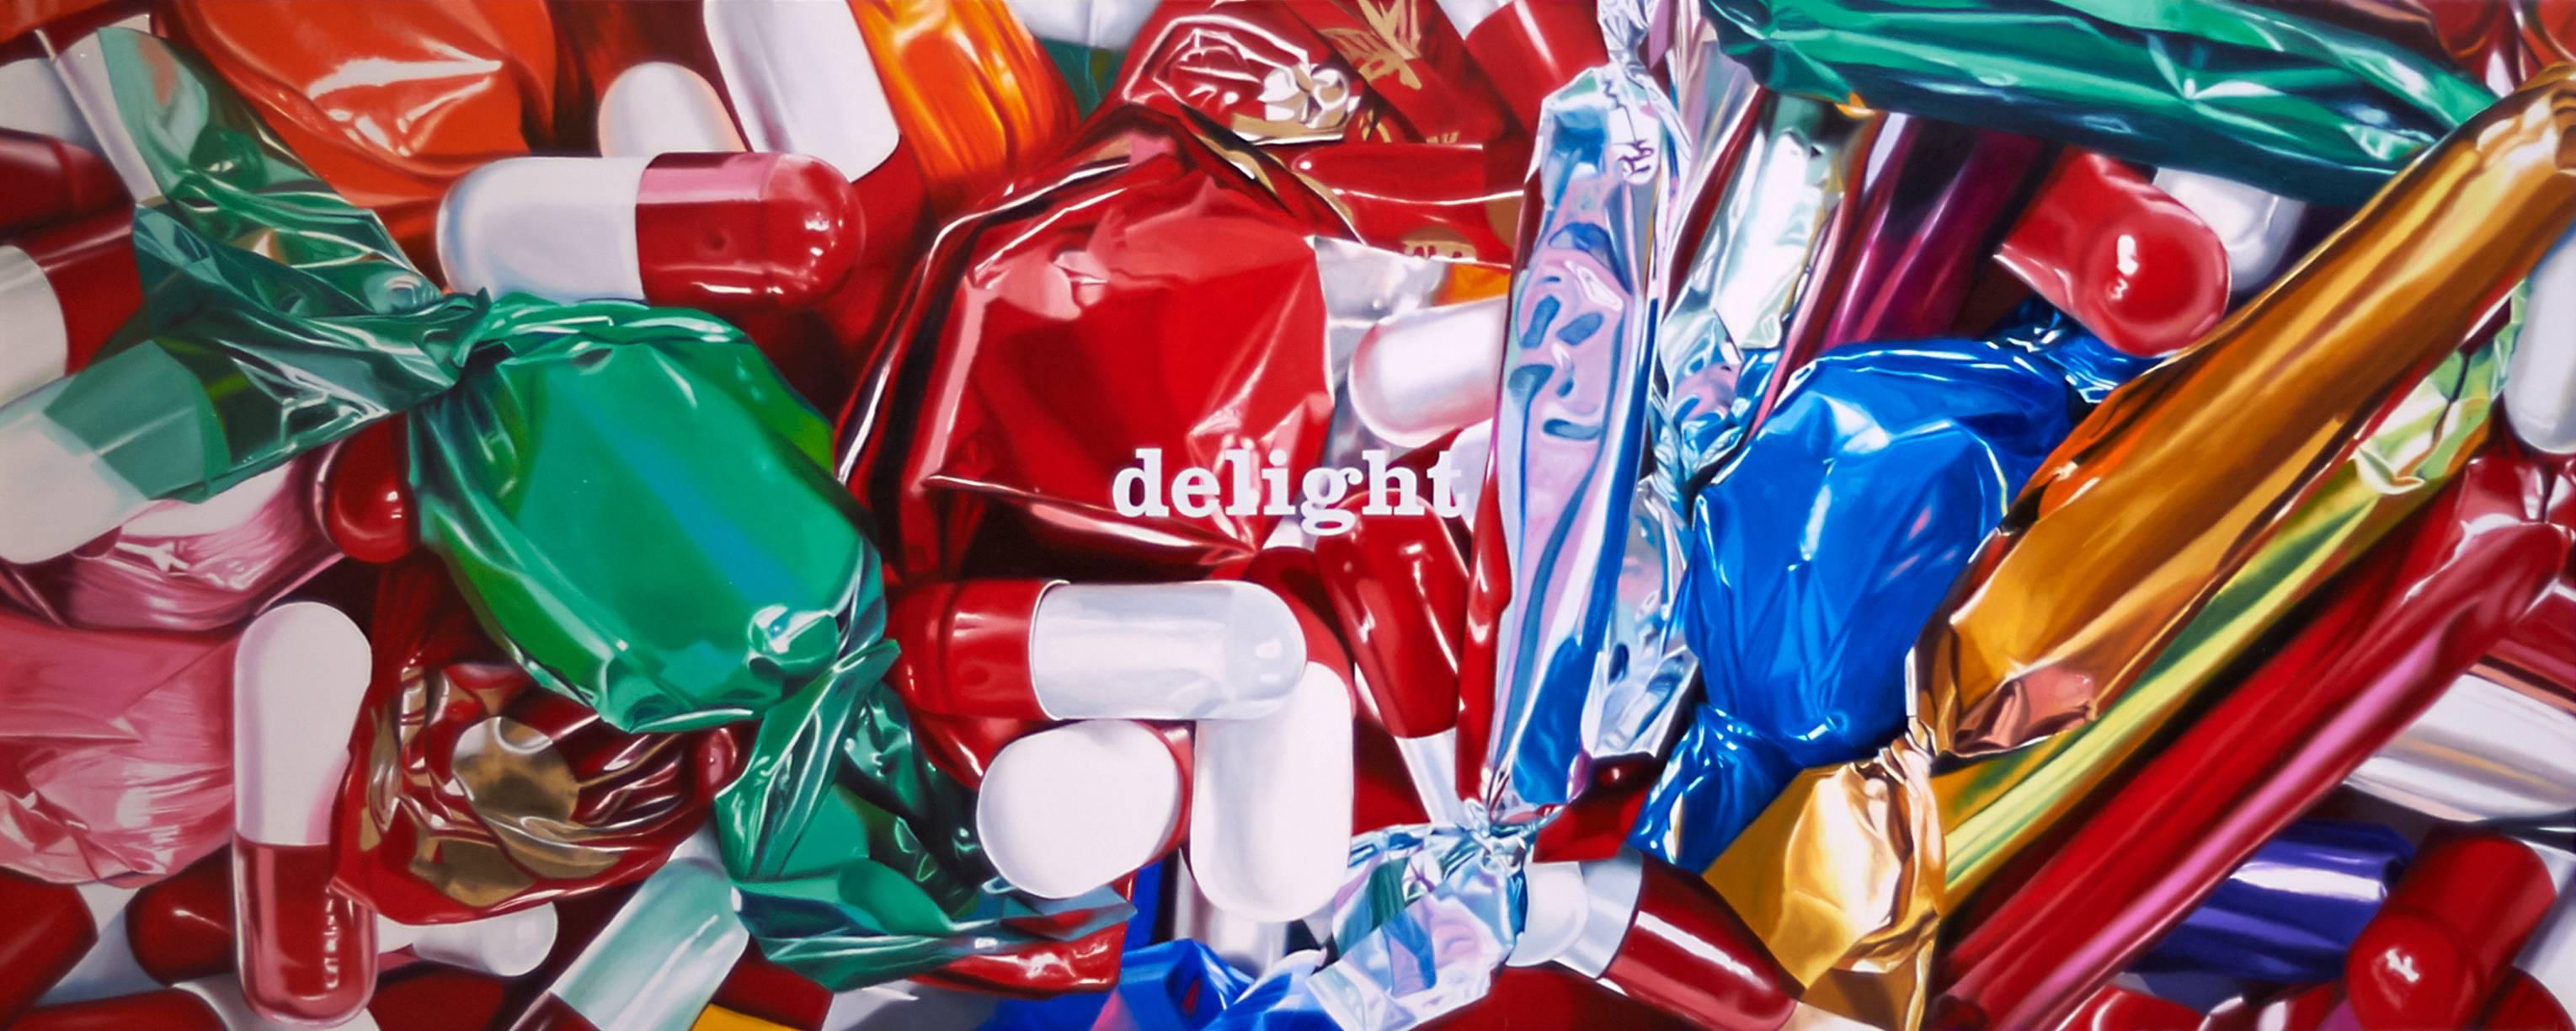 Tagtraum-Delight  – Painting von Philippe Huart